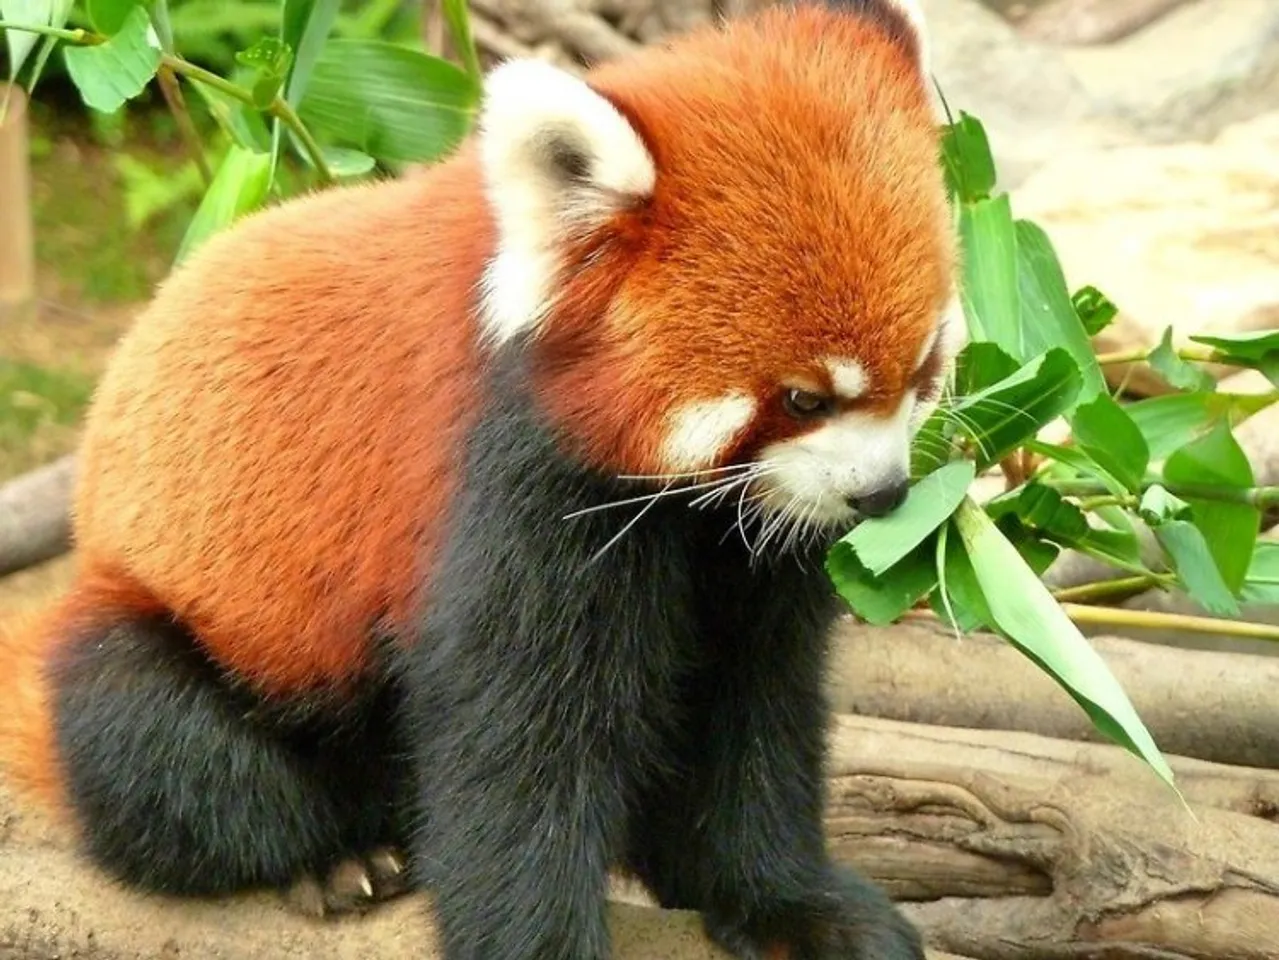 The endangered Red Panda's are found at the Padmaja Naidu Himalayan Zoological Park in Darjeeling, West Bengal. They are the top attraction